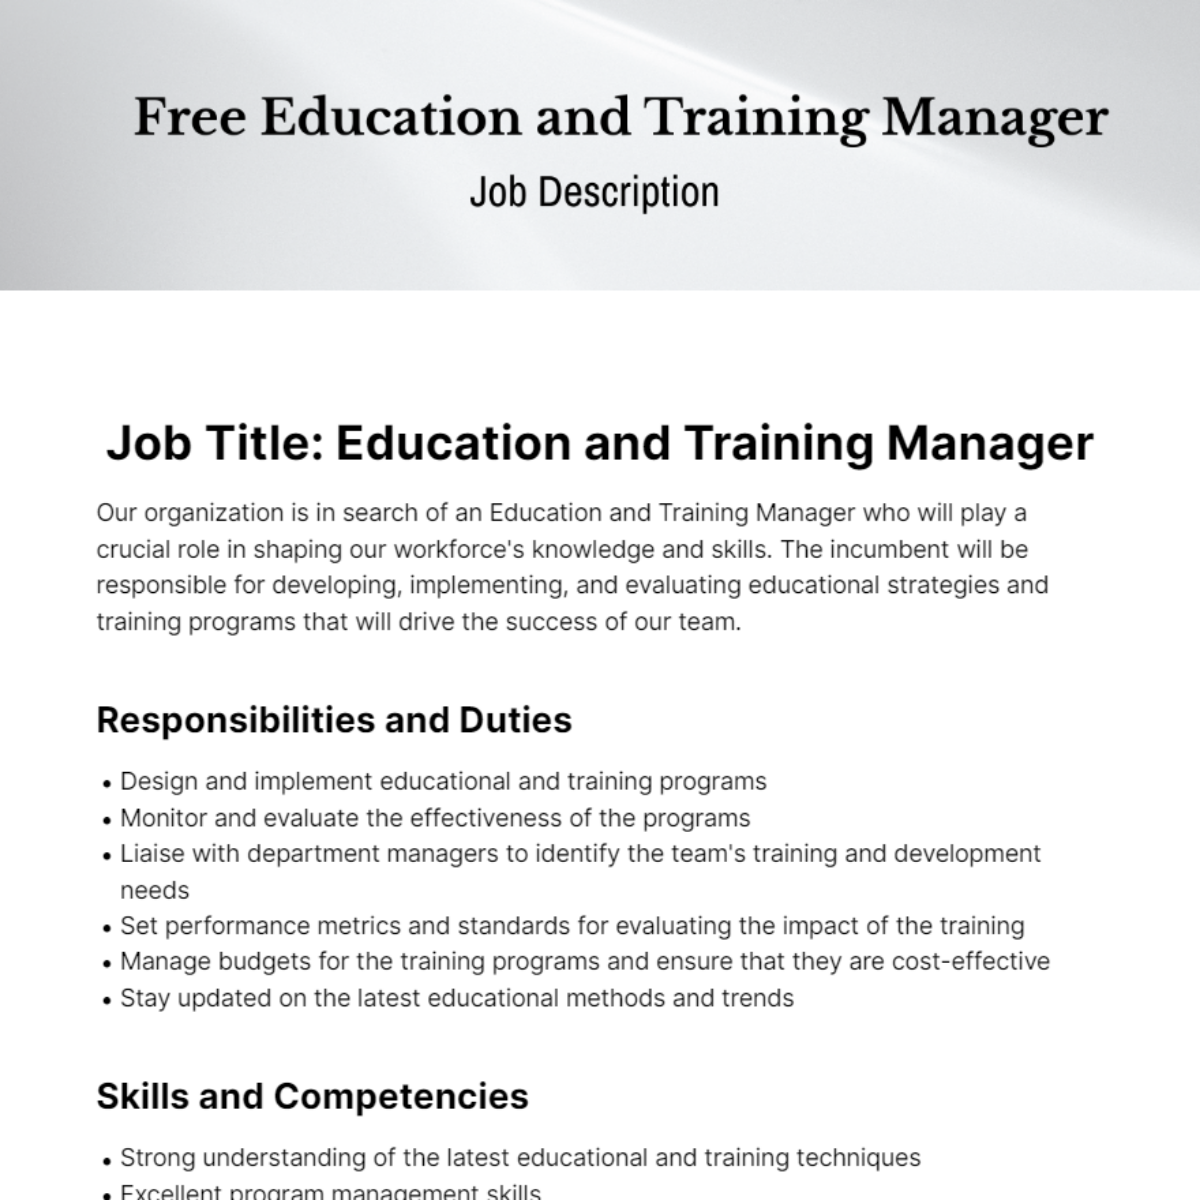 Education and Training Manager Job Description Template